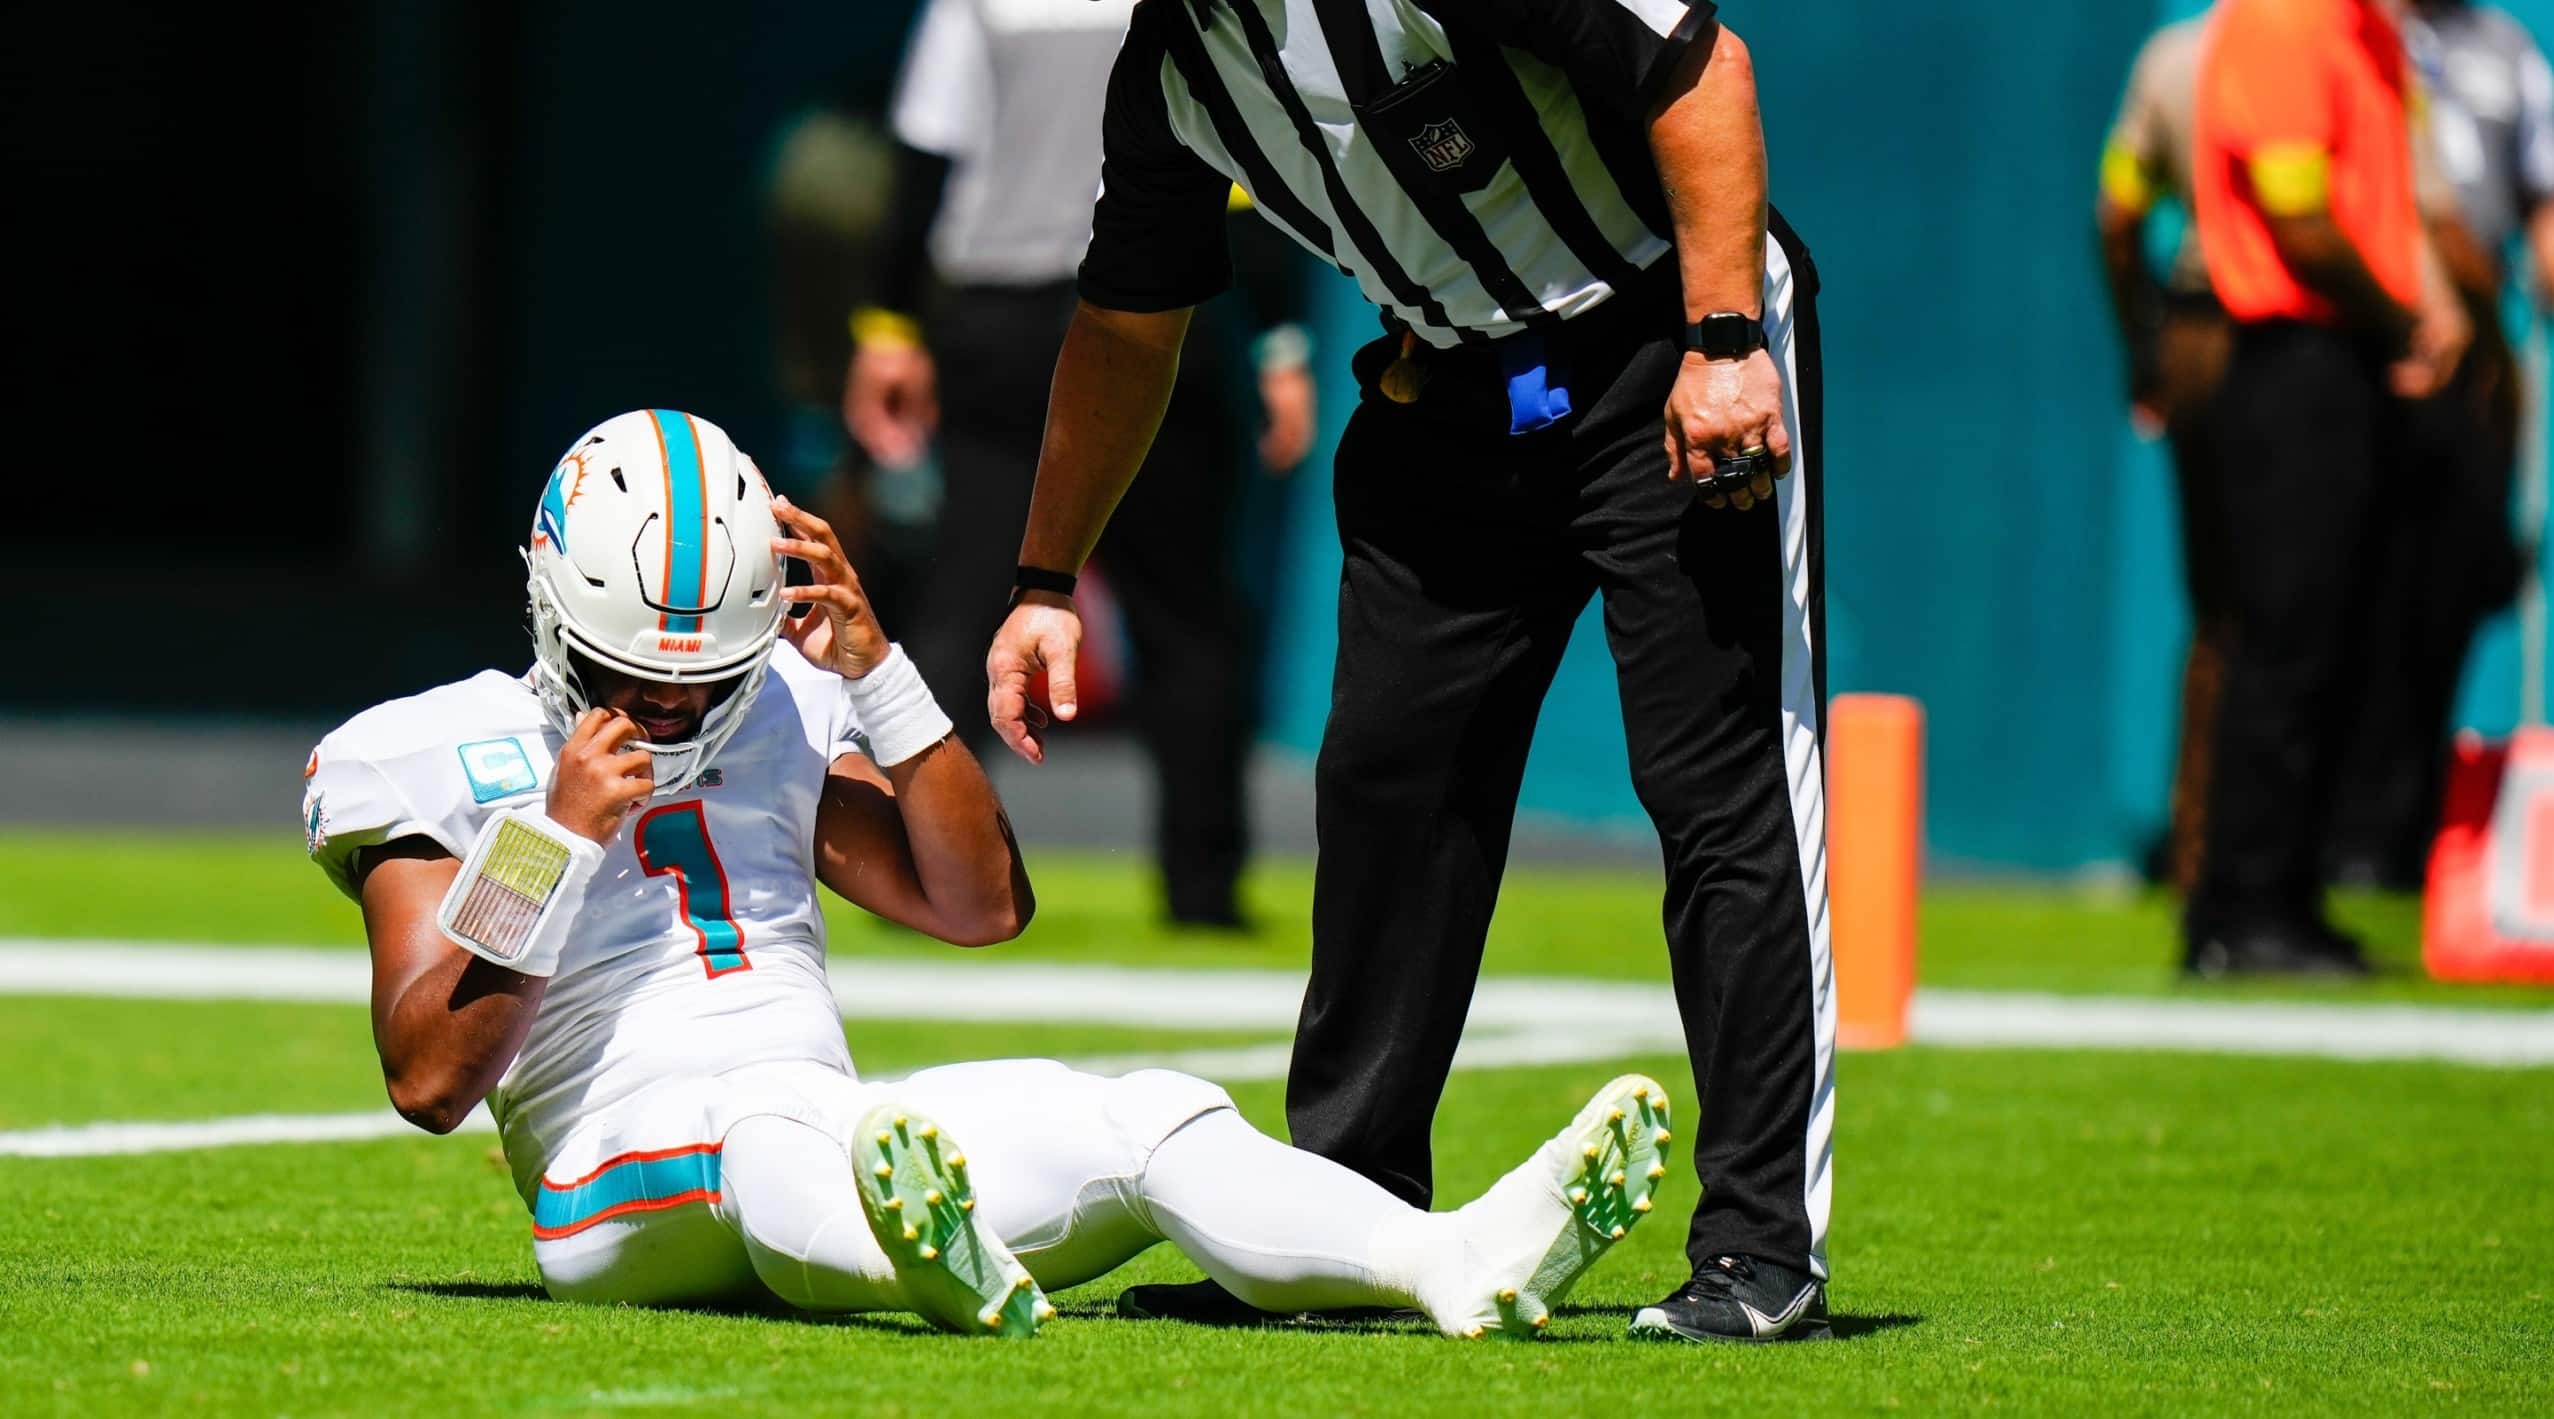 NFL Auction selling first Dolphins jersey signed by Tua Tagovailoa 